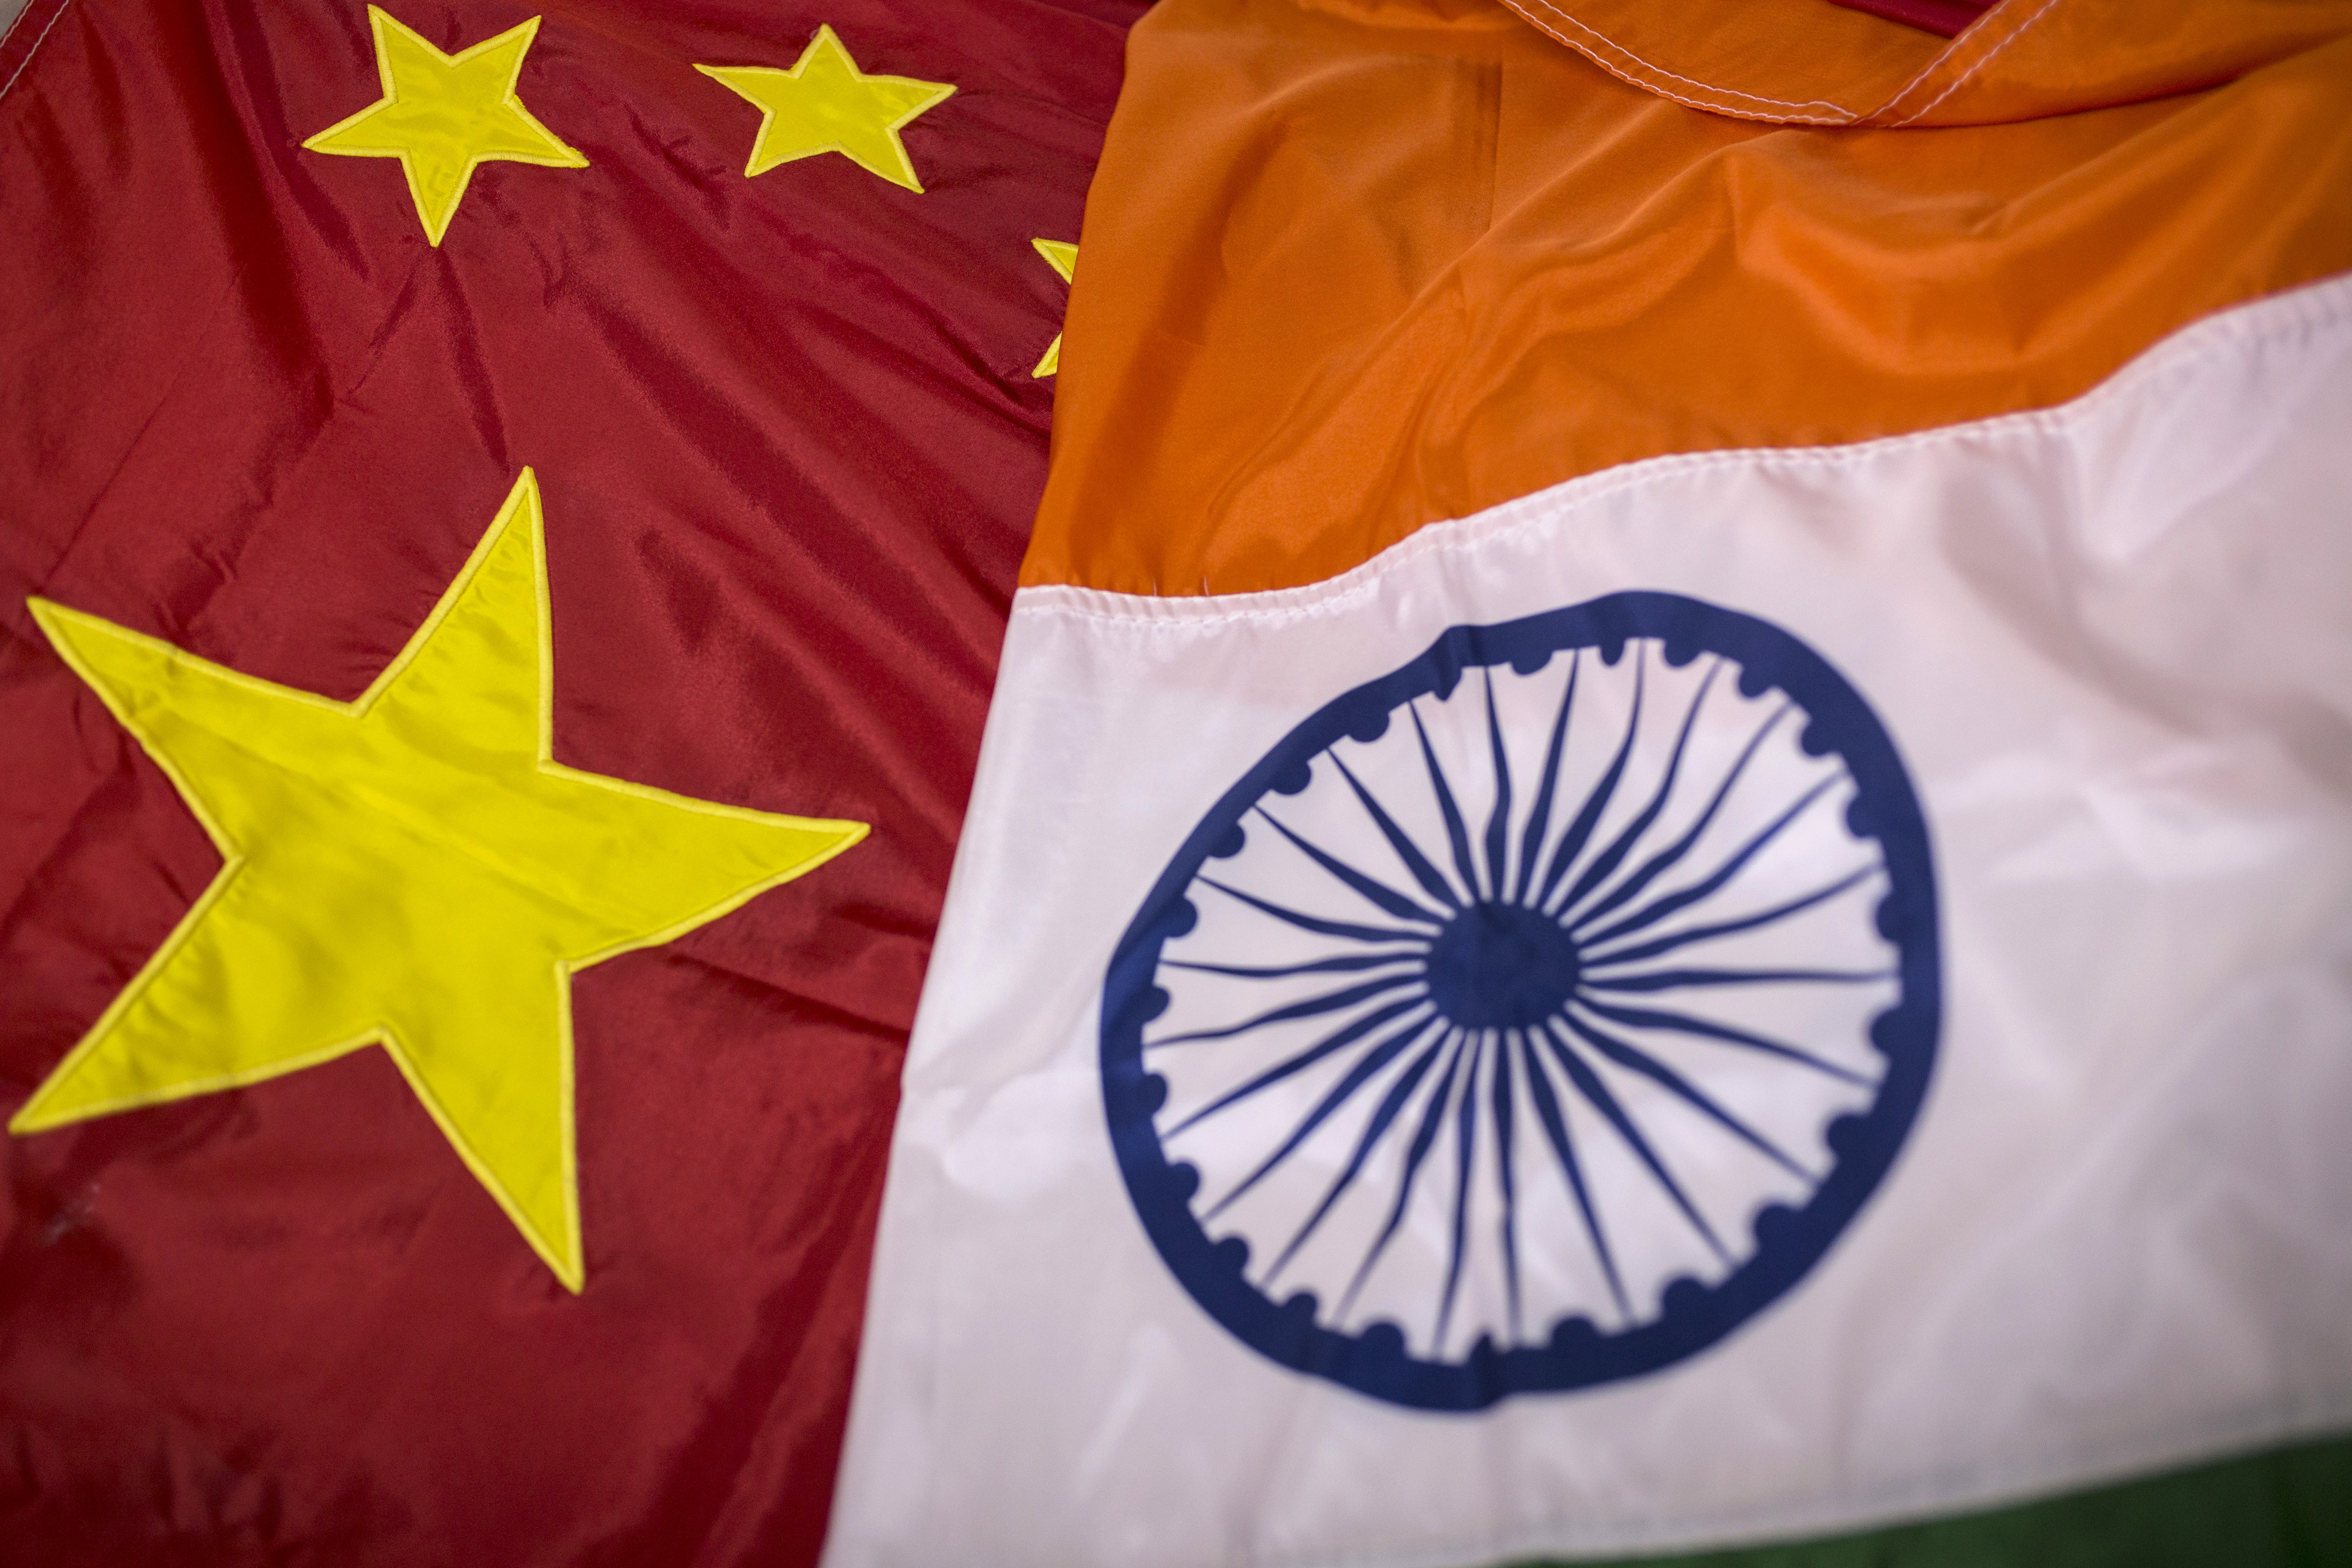 Relations between China and India have been strained since a deadly border clash in 2020. Photo: Bloomberg